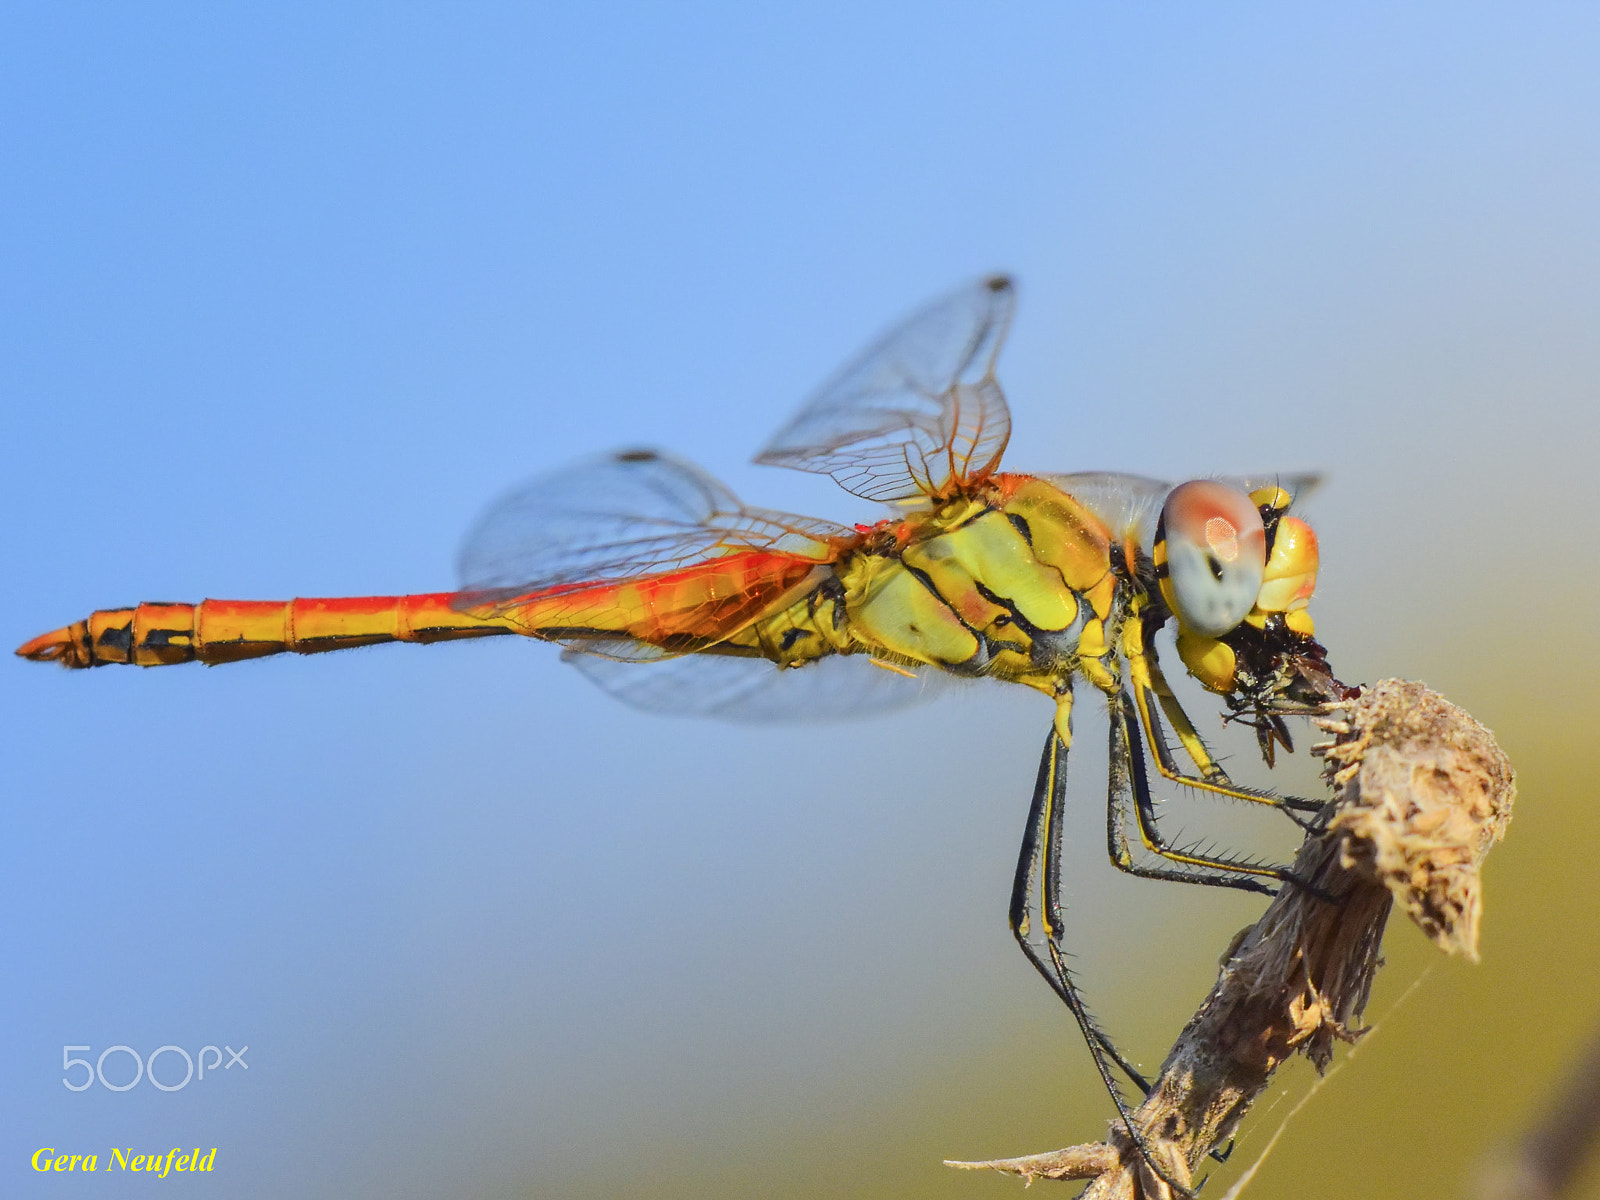 150mm f/2.8G sample photo. Dragonfly eating a small fly photography